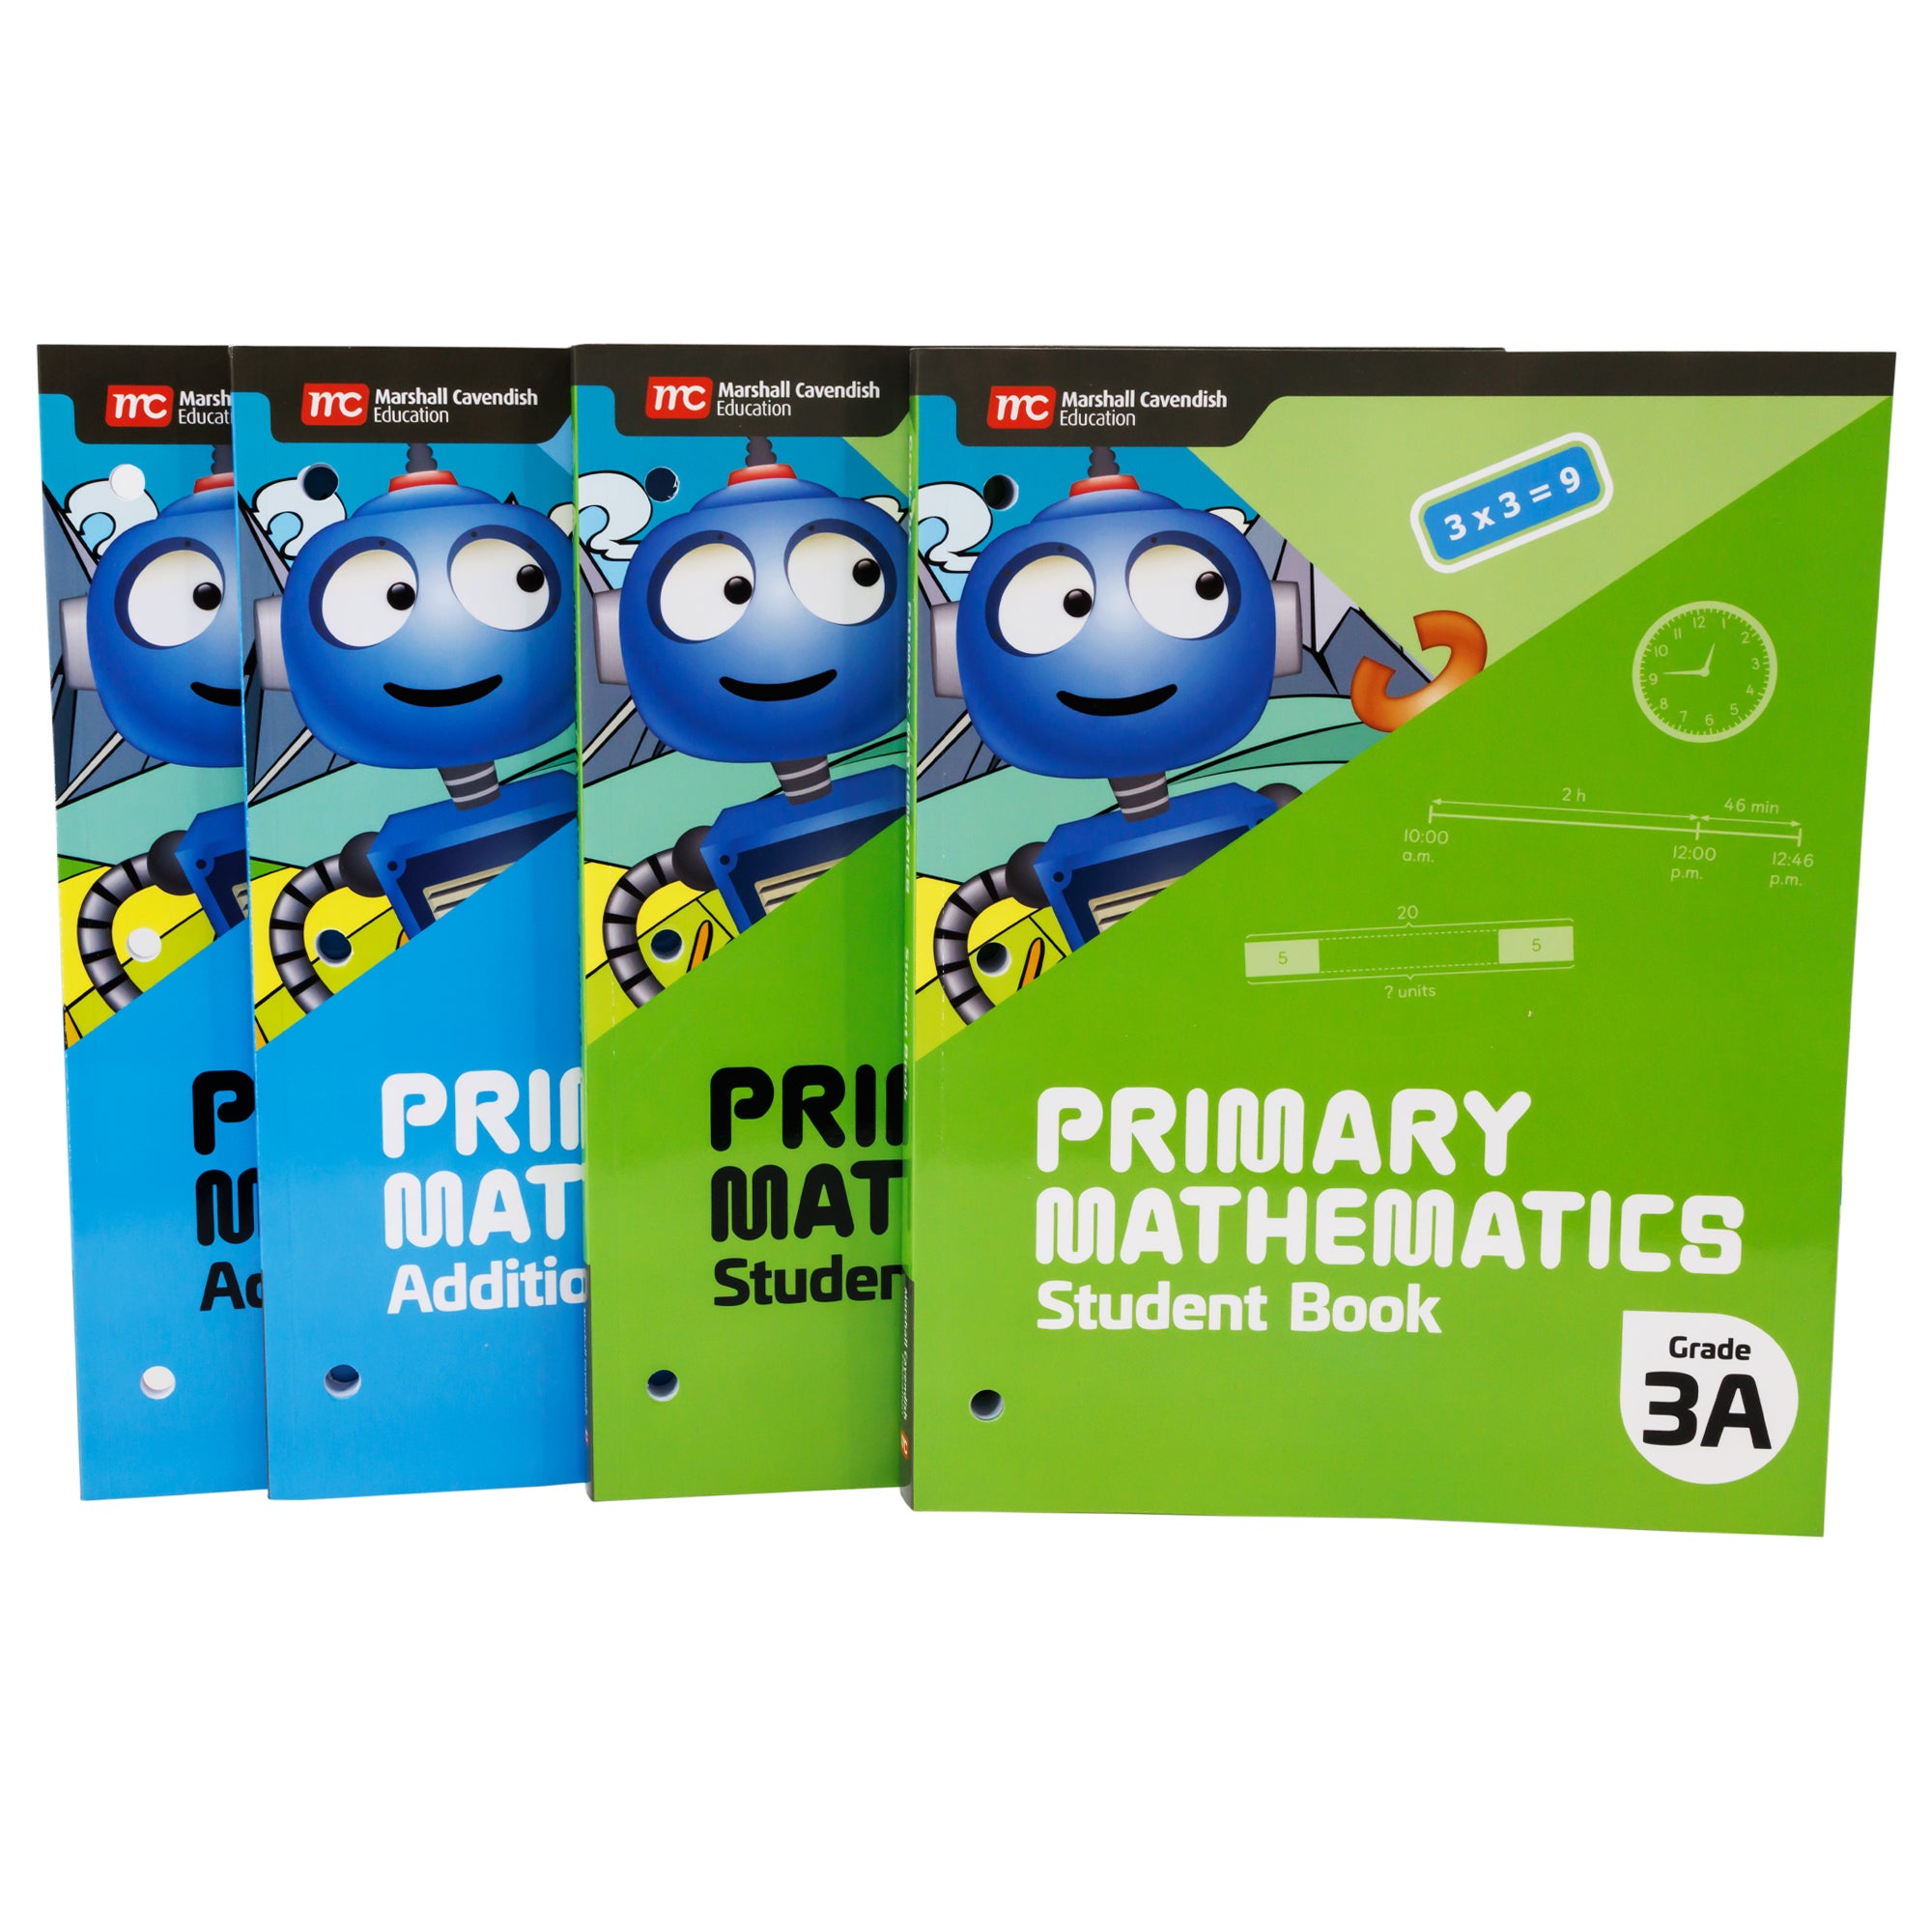 A row of 4 Singapore Primary Math third grade books. All books show a robot on the cover with a blue background on the 2 left books and a green background on the 2 right books.